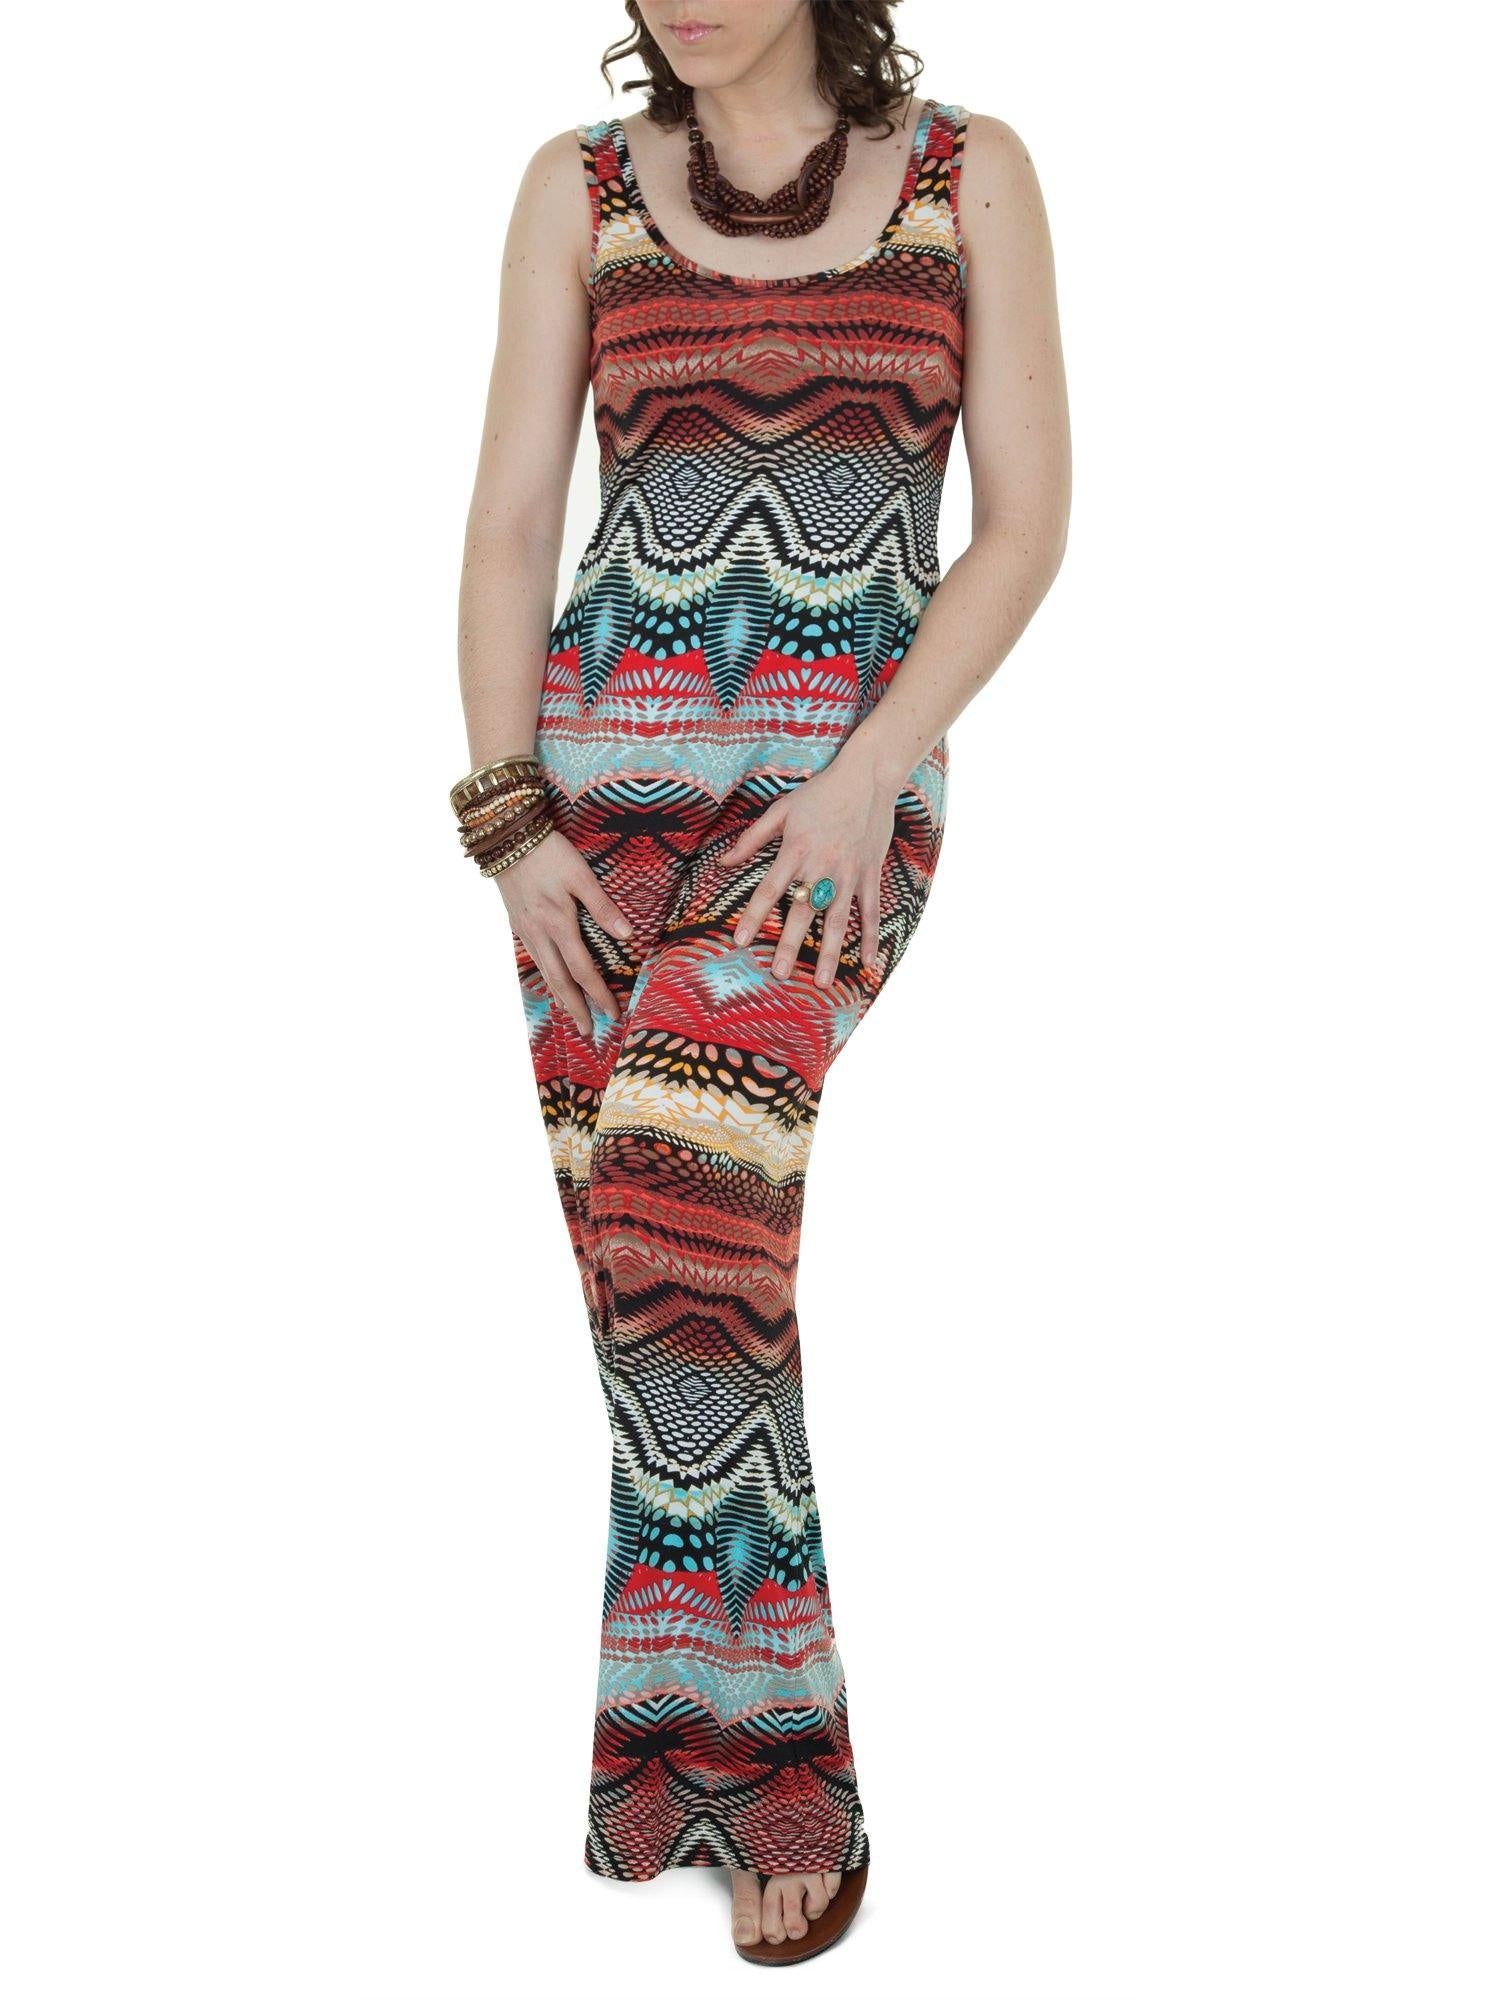 Jalie 3246 - Maxi Dress in a Printed Knit